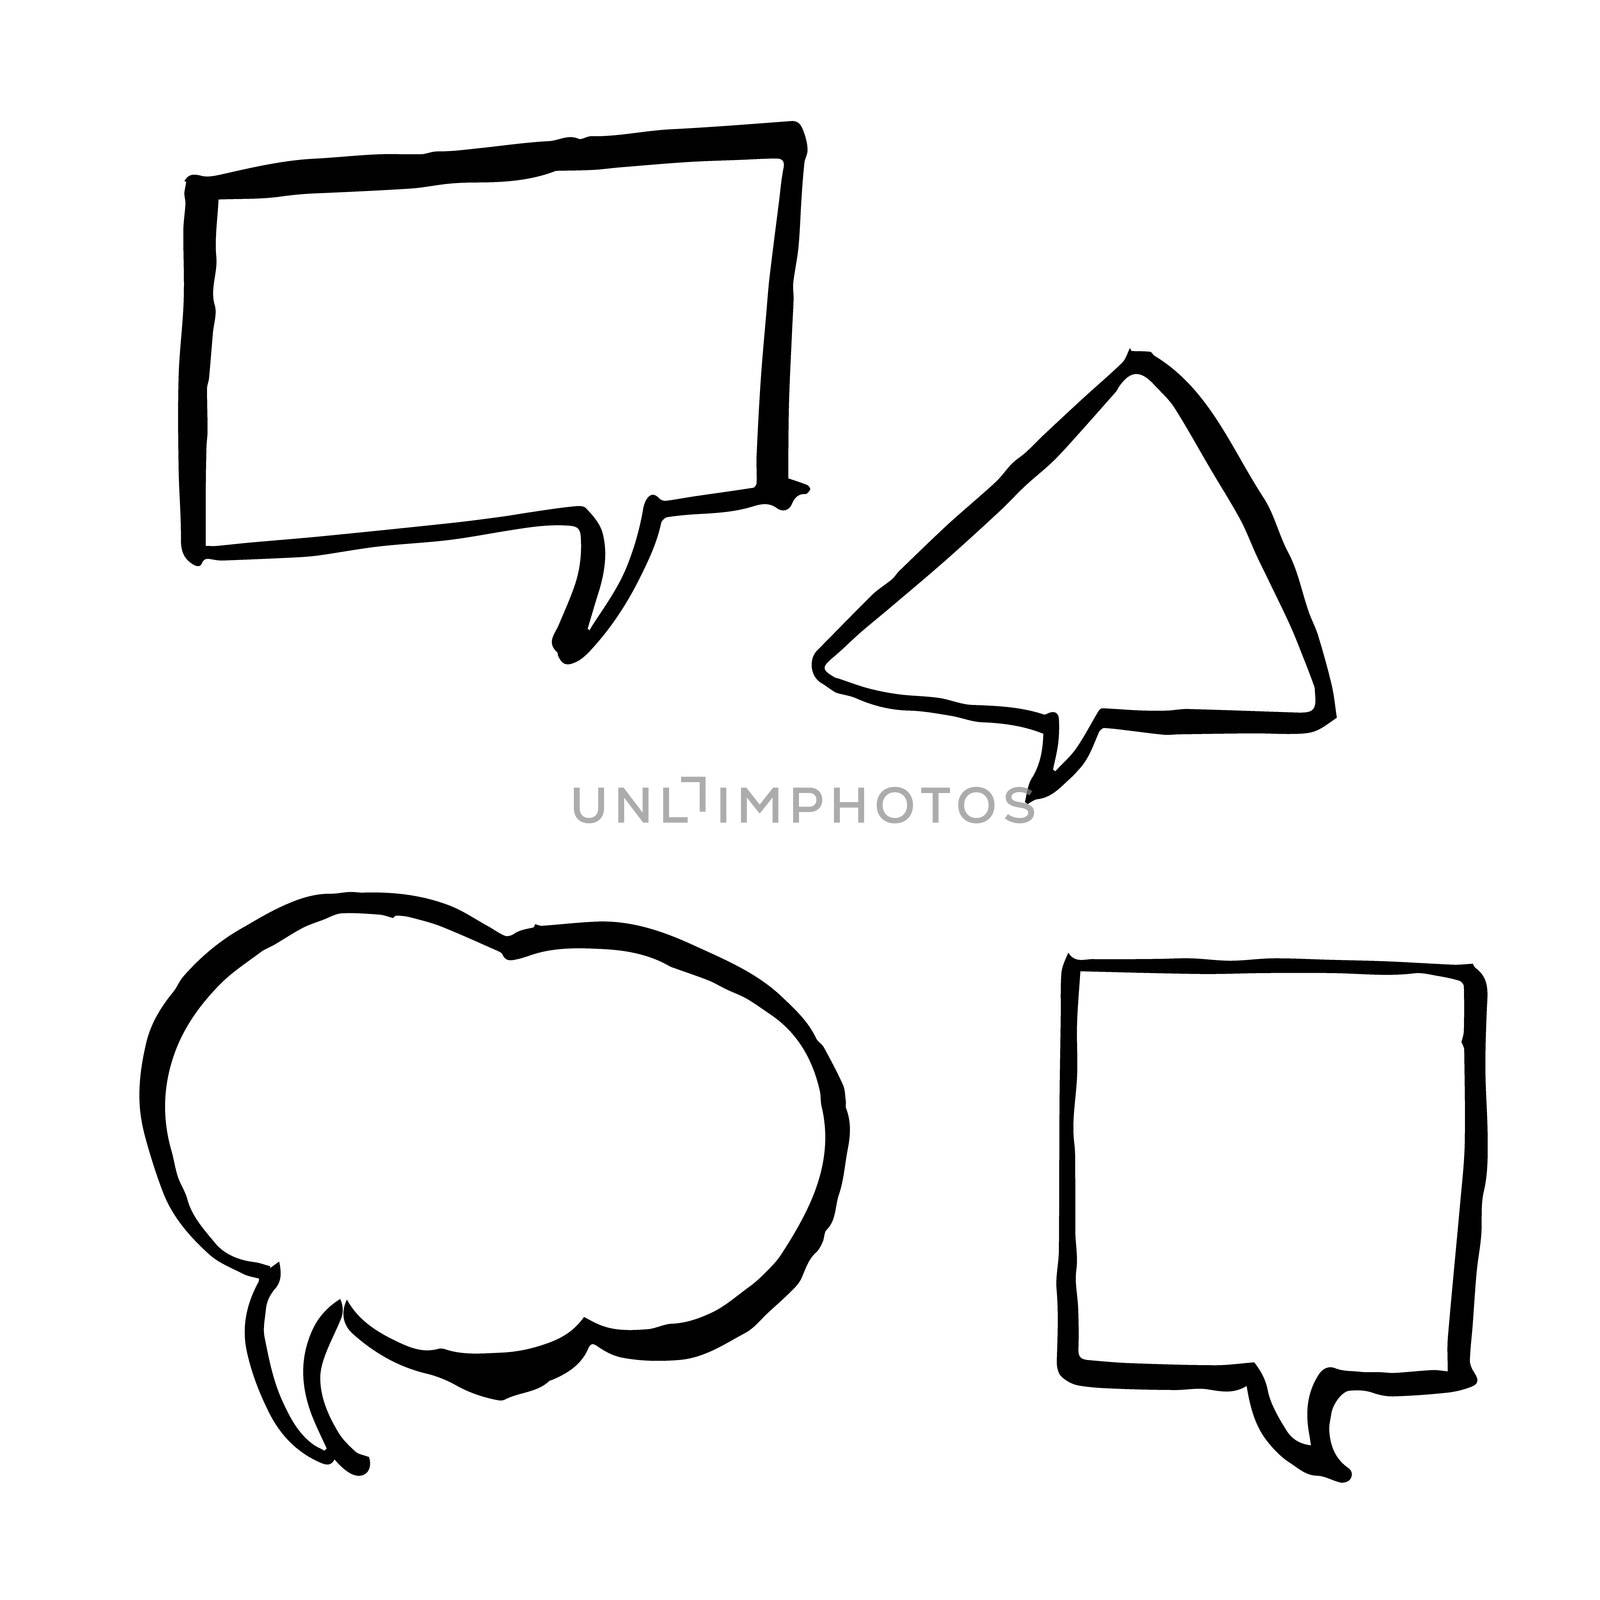 freehand sketch illustration  speech bubble symbol doodle hand drawn